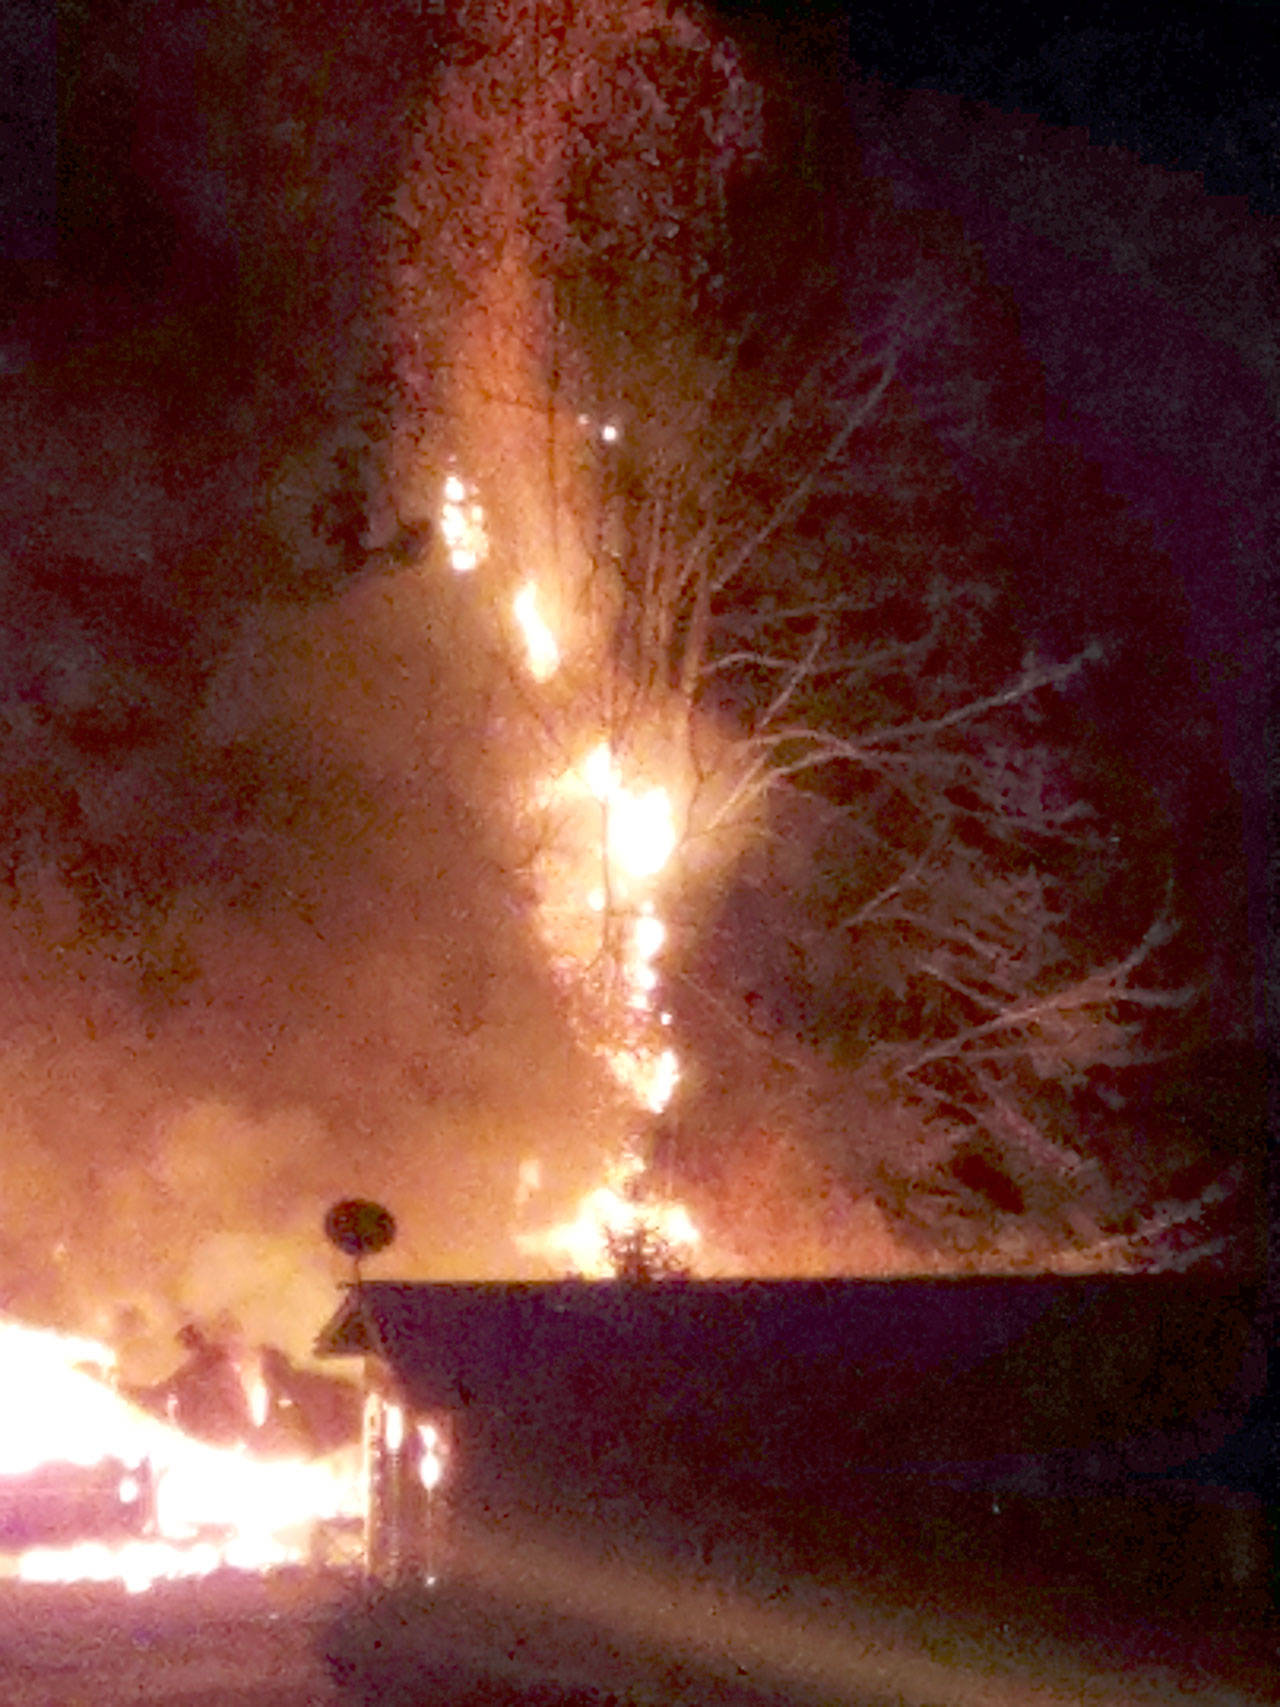 Flames burn a nearby tree as a mobile home burns in Joyce early Tuesday morning. (Cody Freeze)